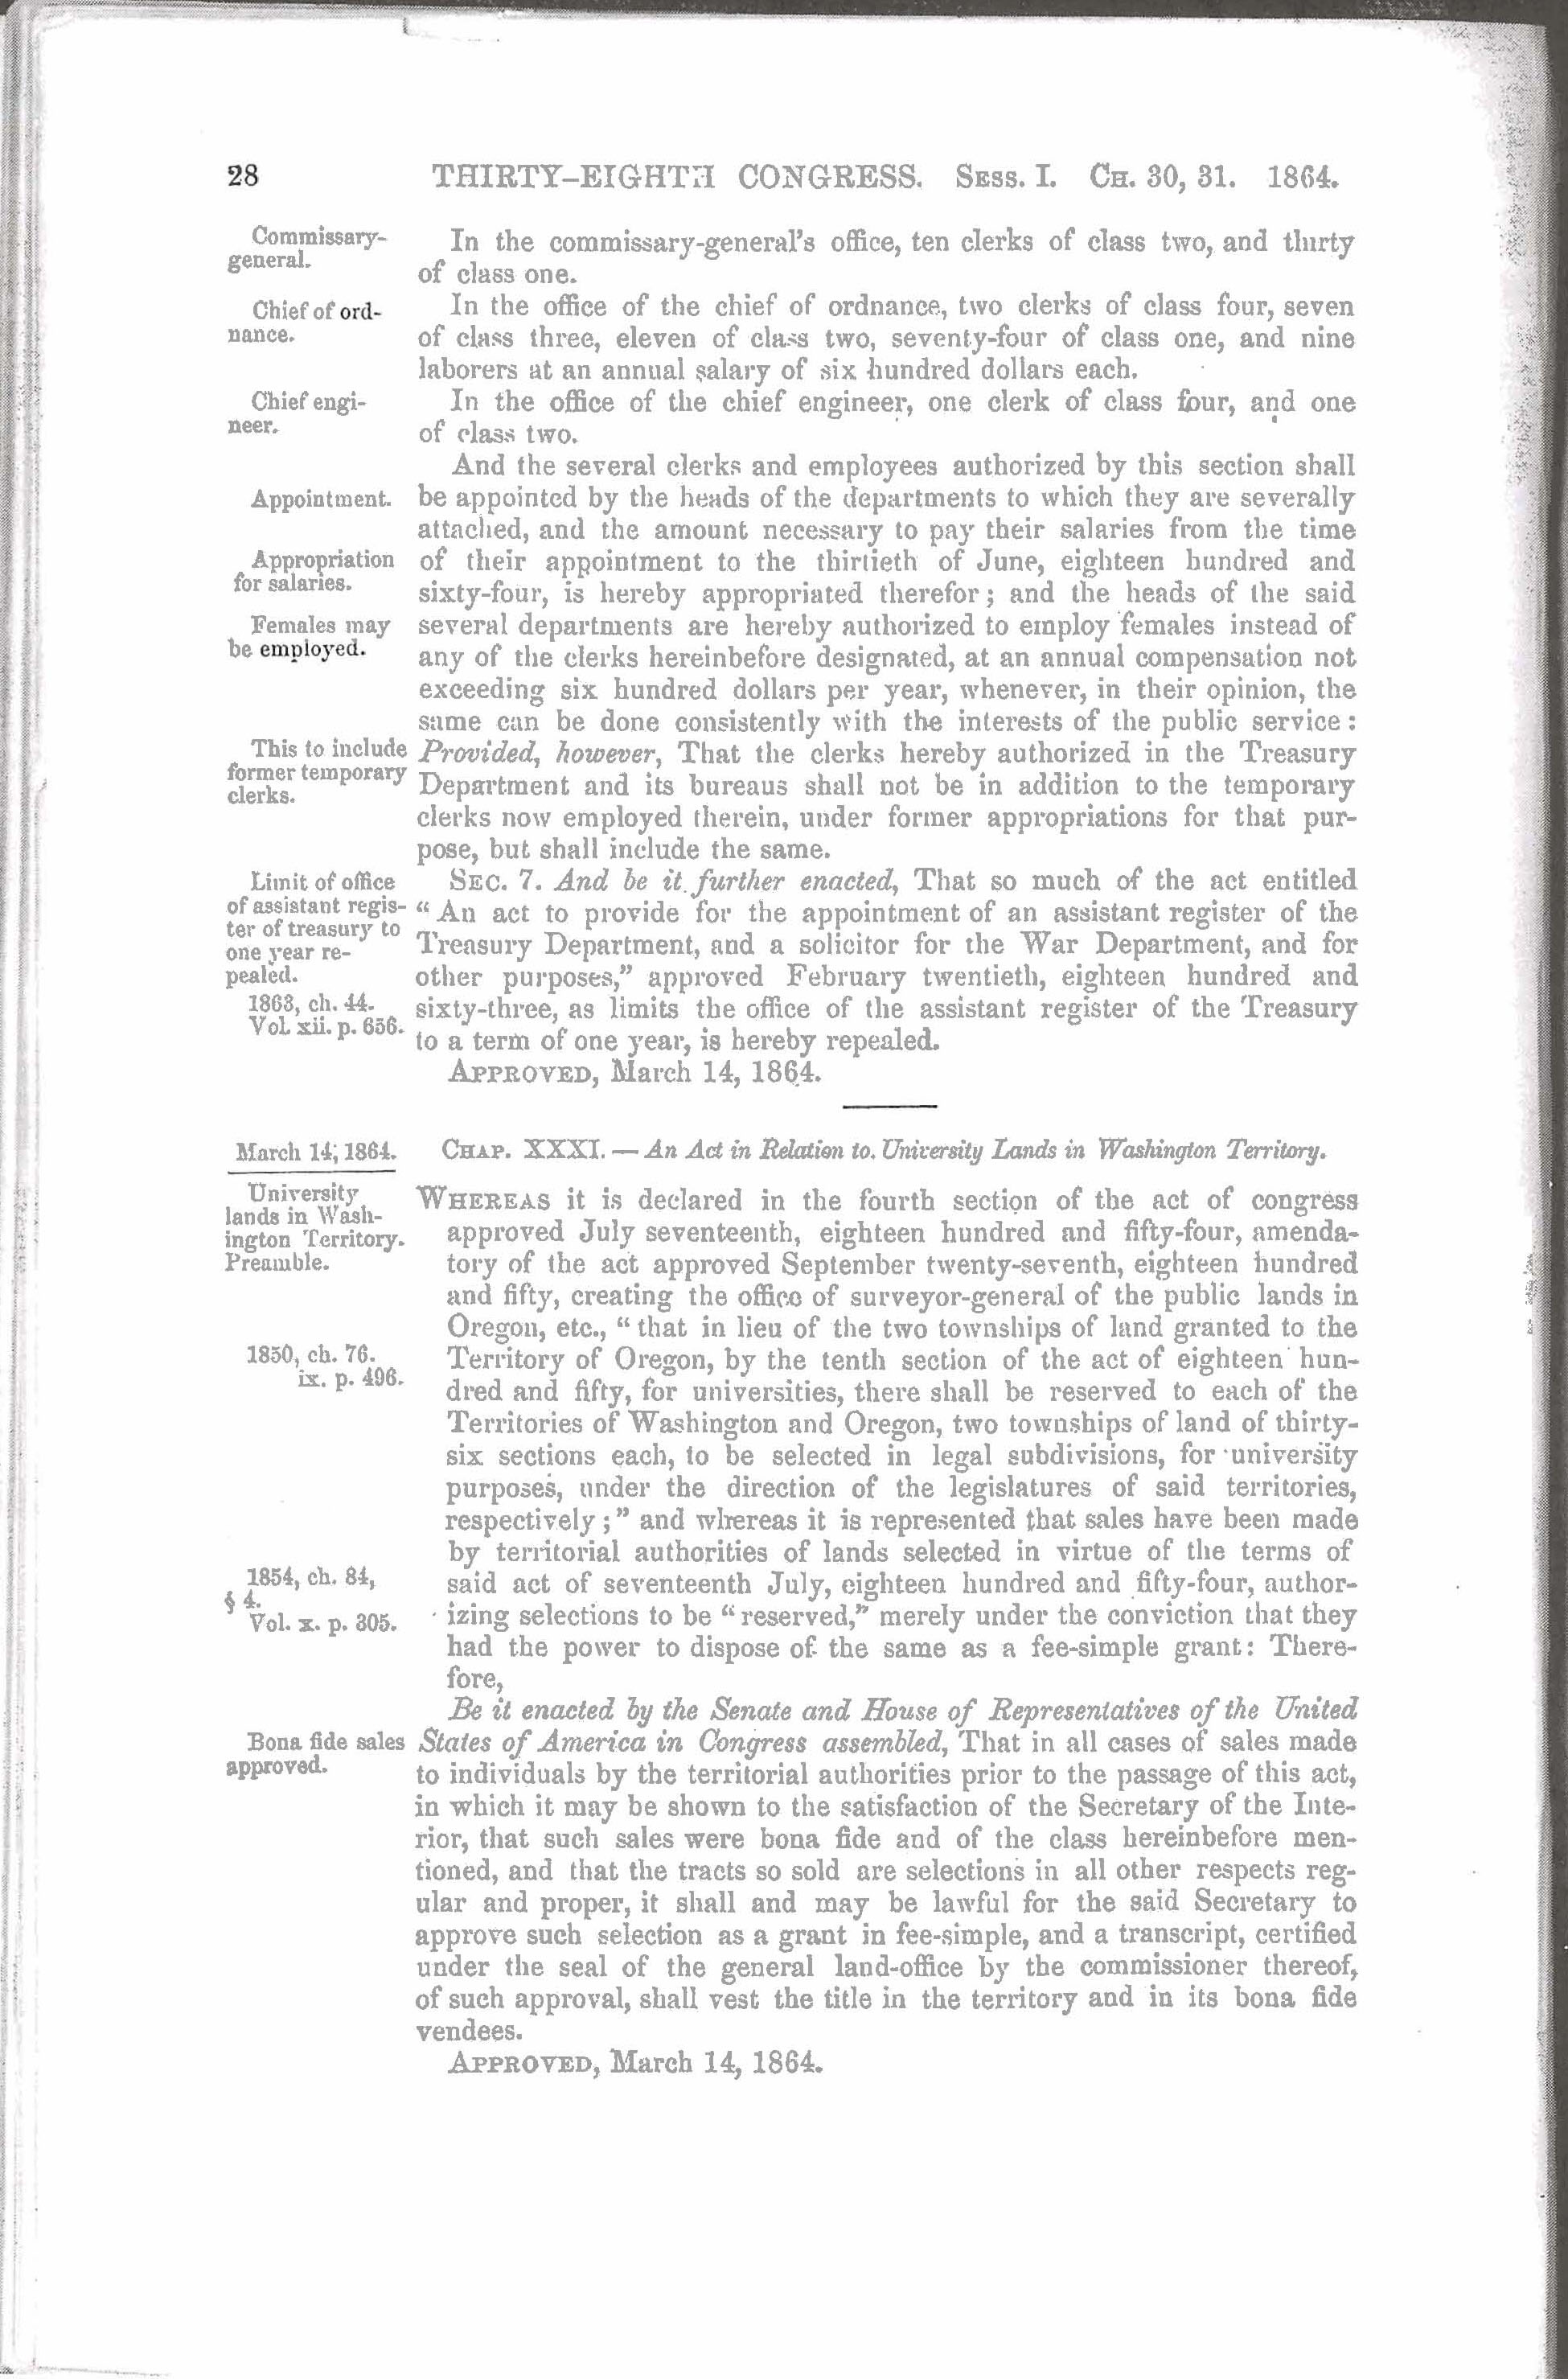 Act of Congress Authorizing Construction of the Washington Naval Hospital, Page 7 of 7